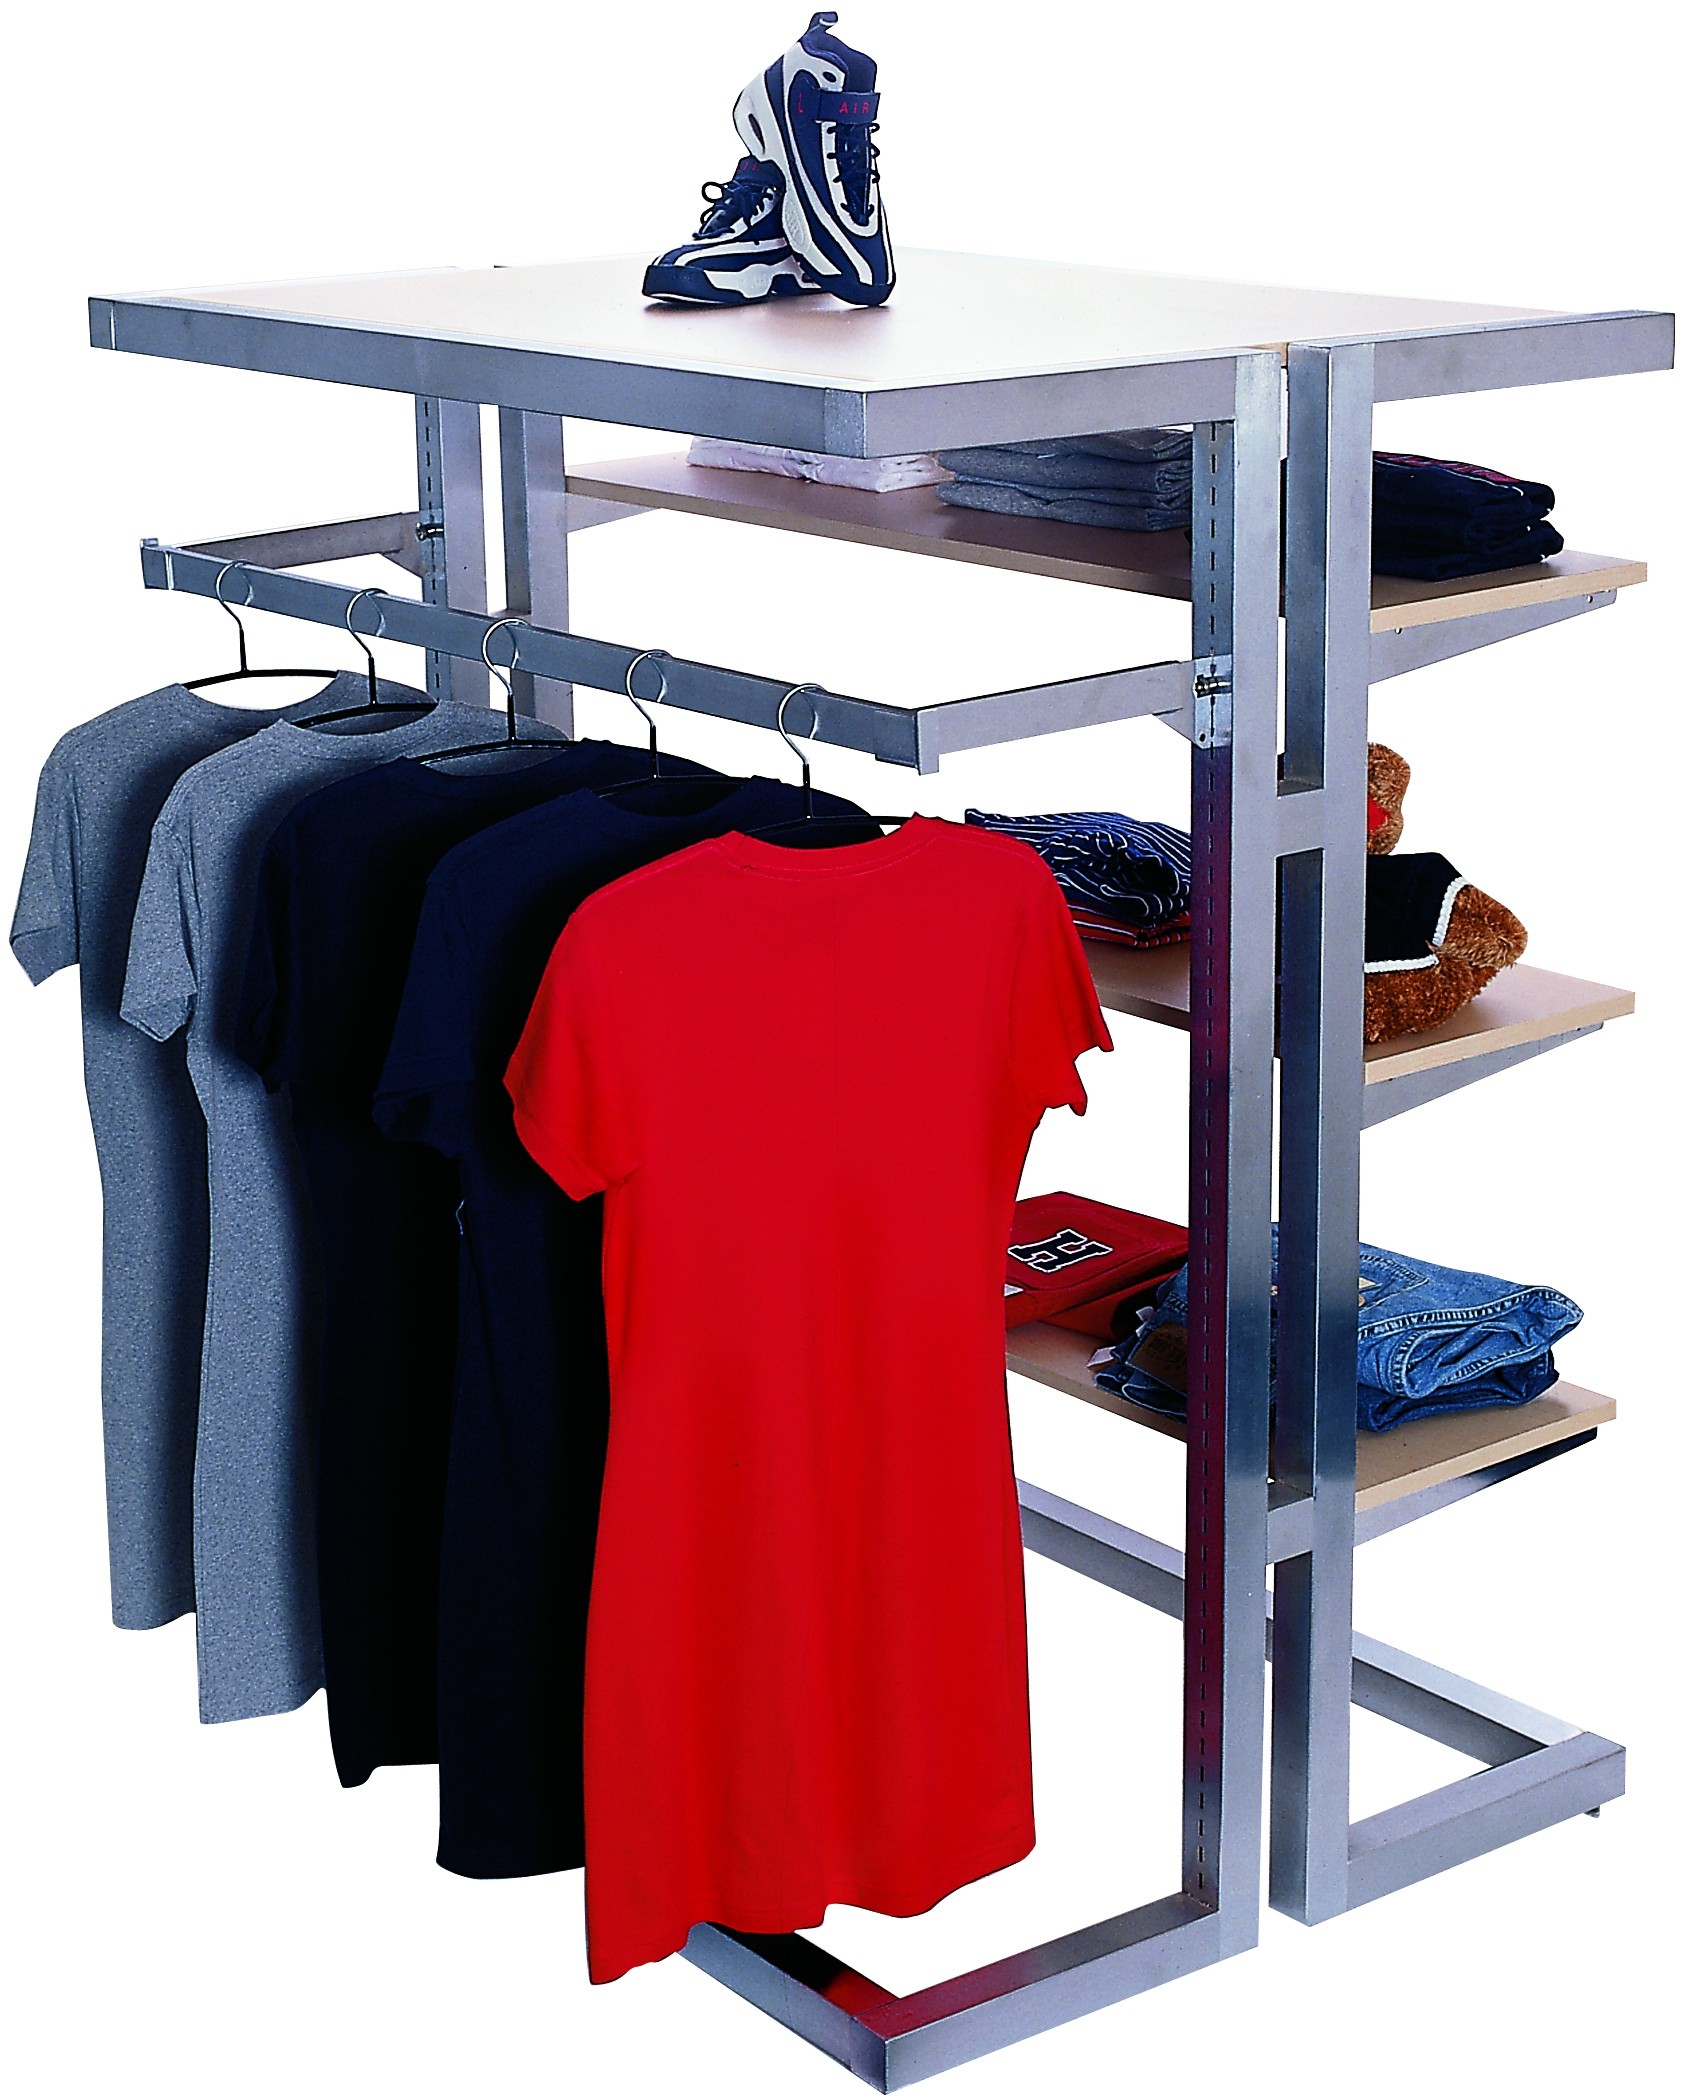 Folding wall clothes rack